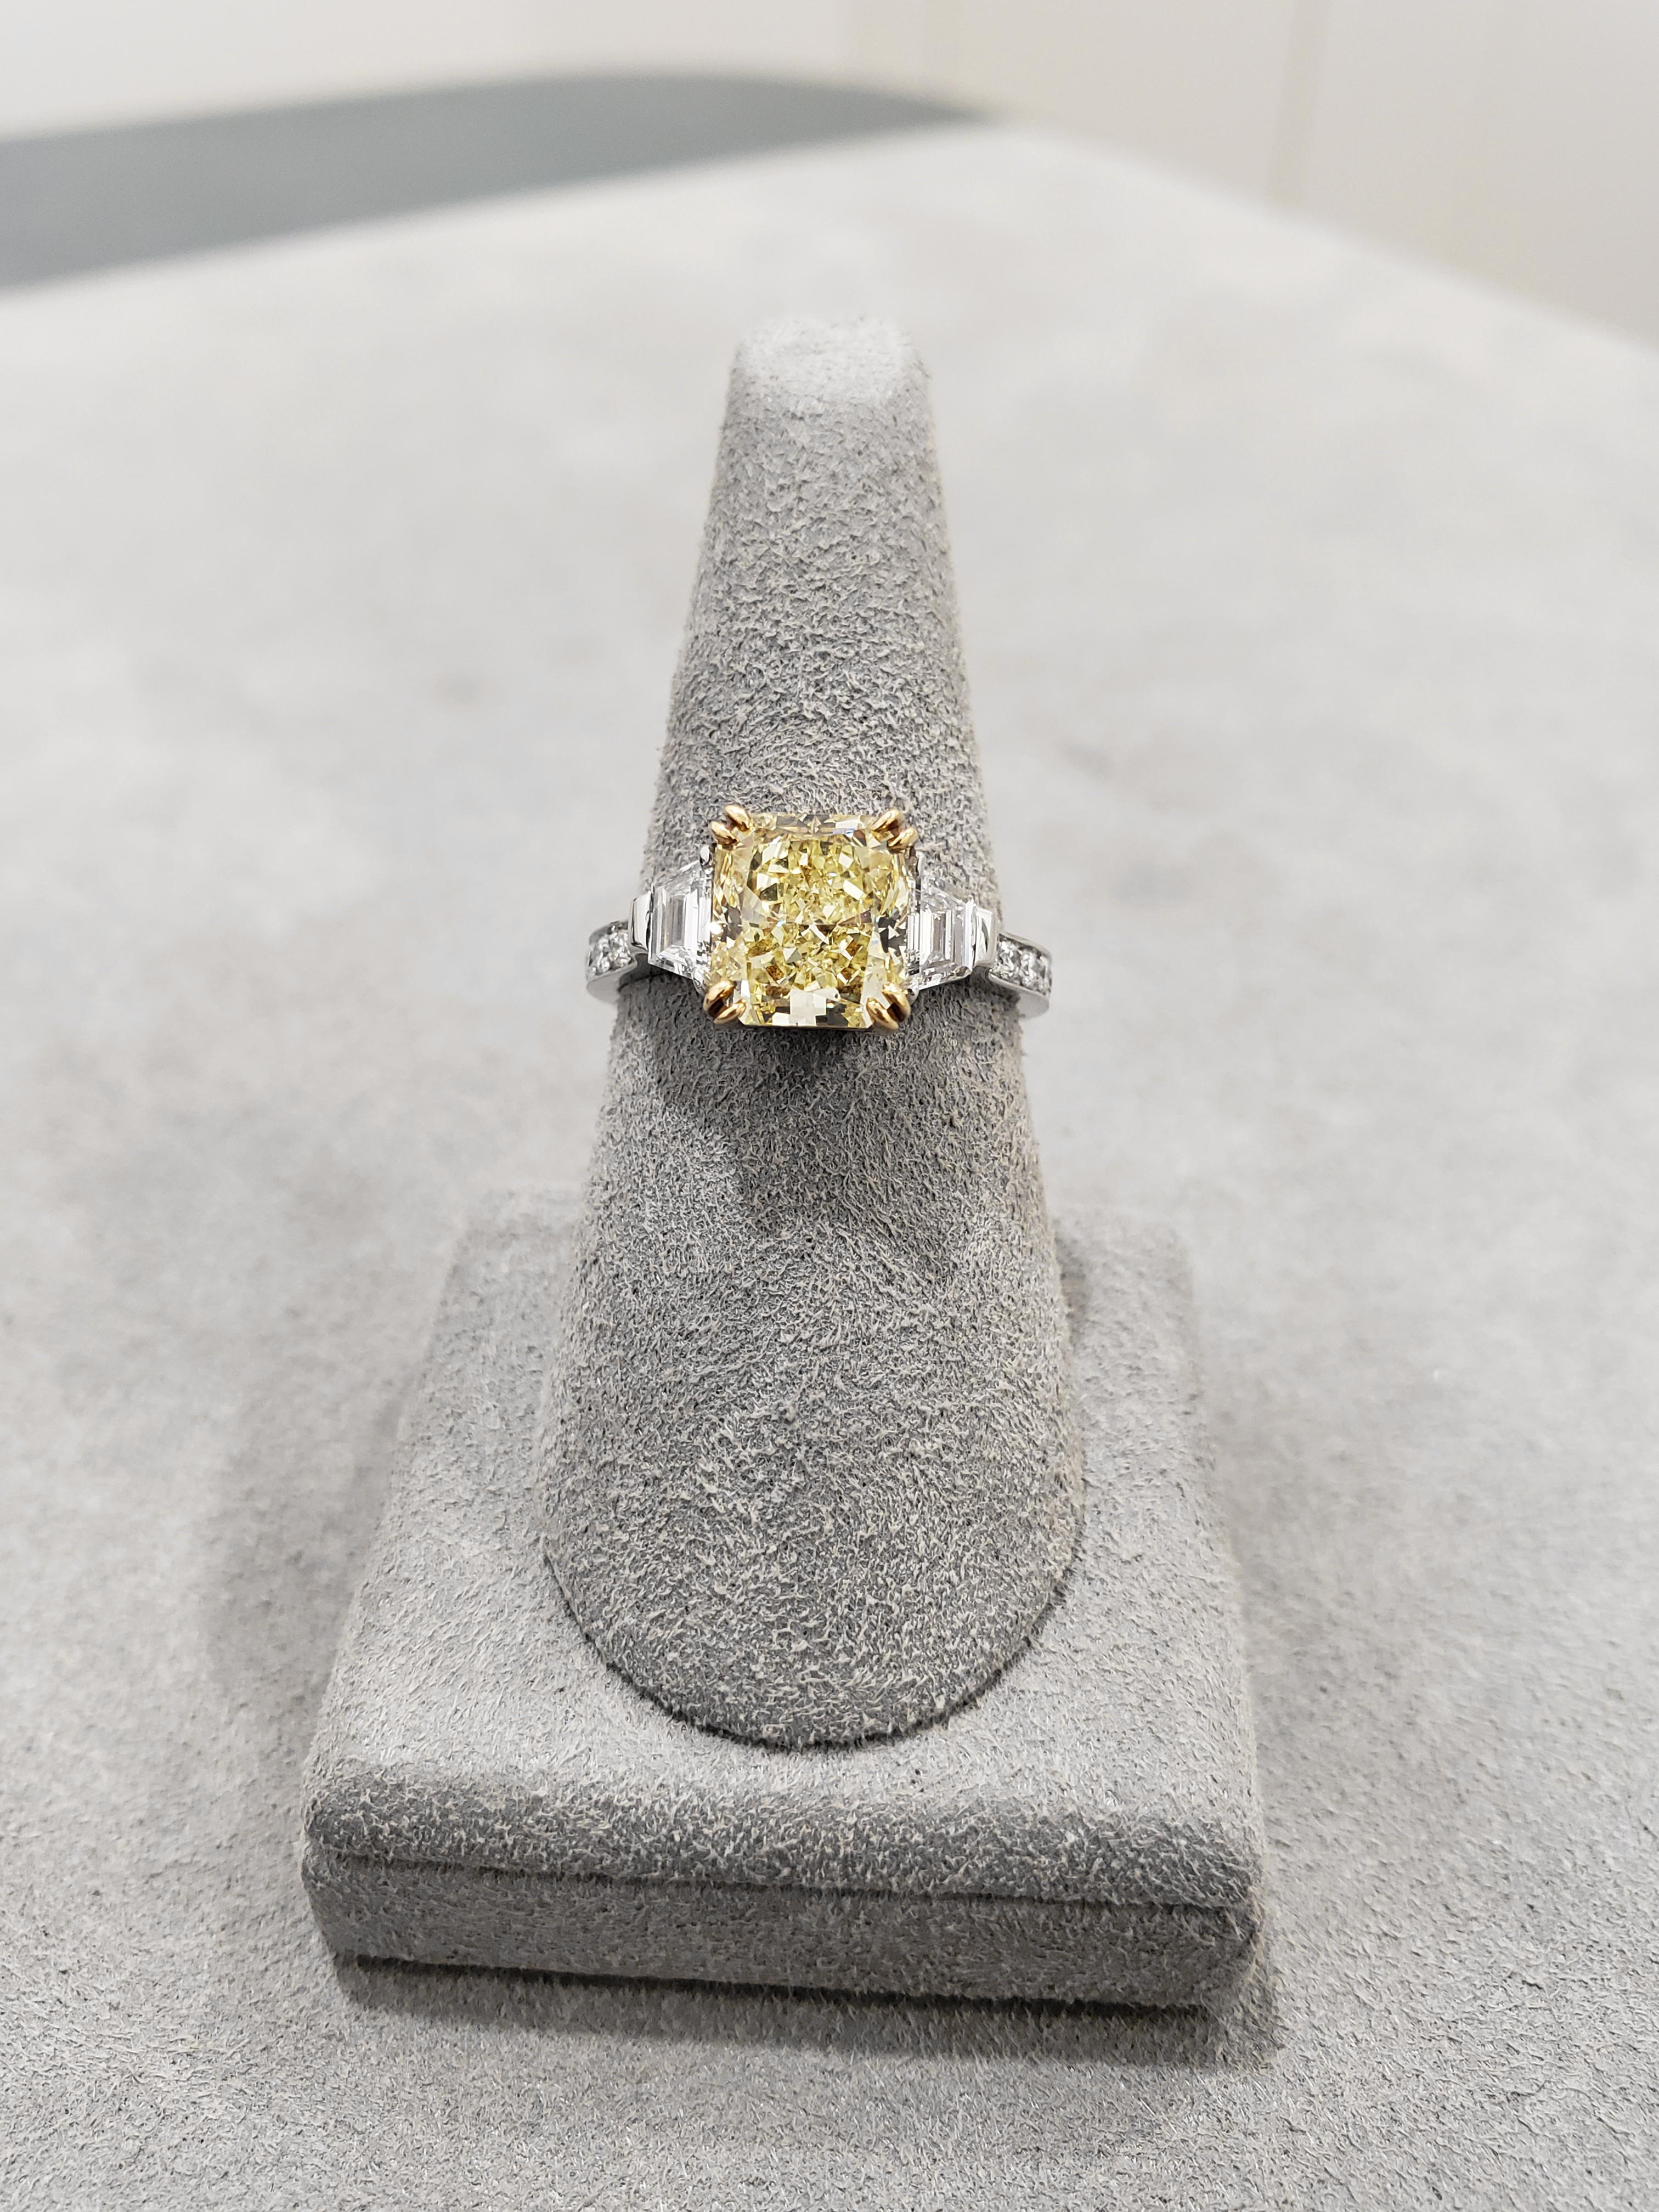 A color-rich engagement ring showcasing a gorgeous 2.52 carat radiant cut yellow diamond securely set in a double eagle prong yellow gold basket. GIA Certified the center diamond as Fancy Yellow color, VS1 clarity. Step-cut trapezoid diamonds